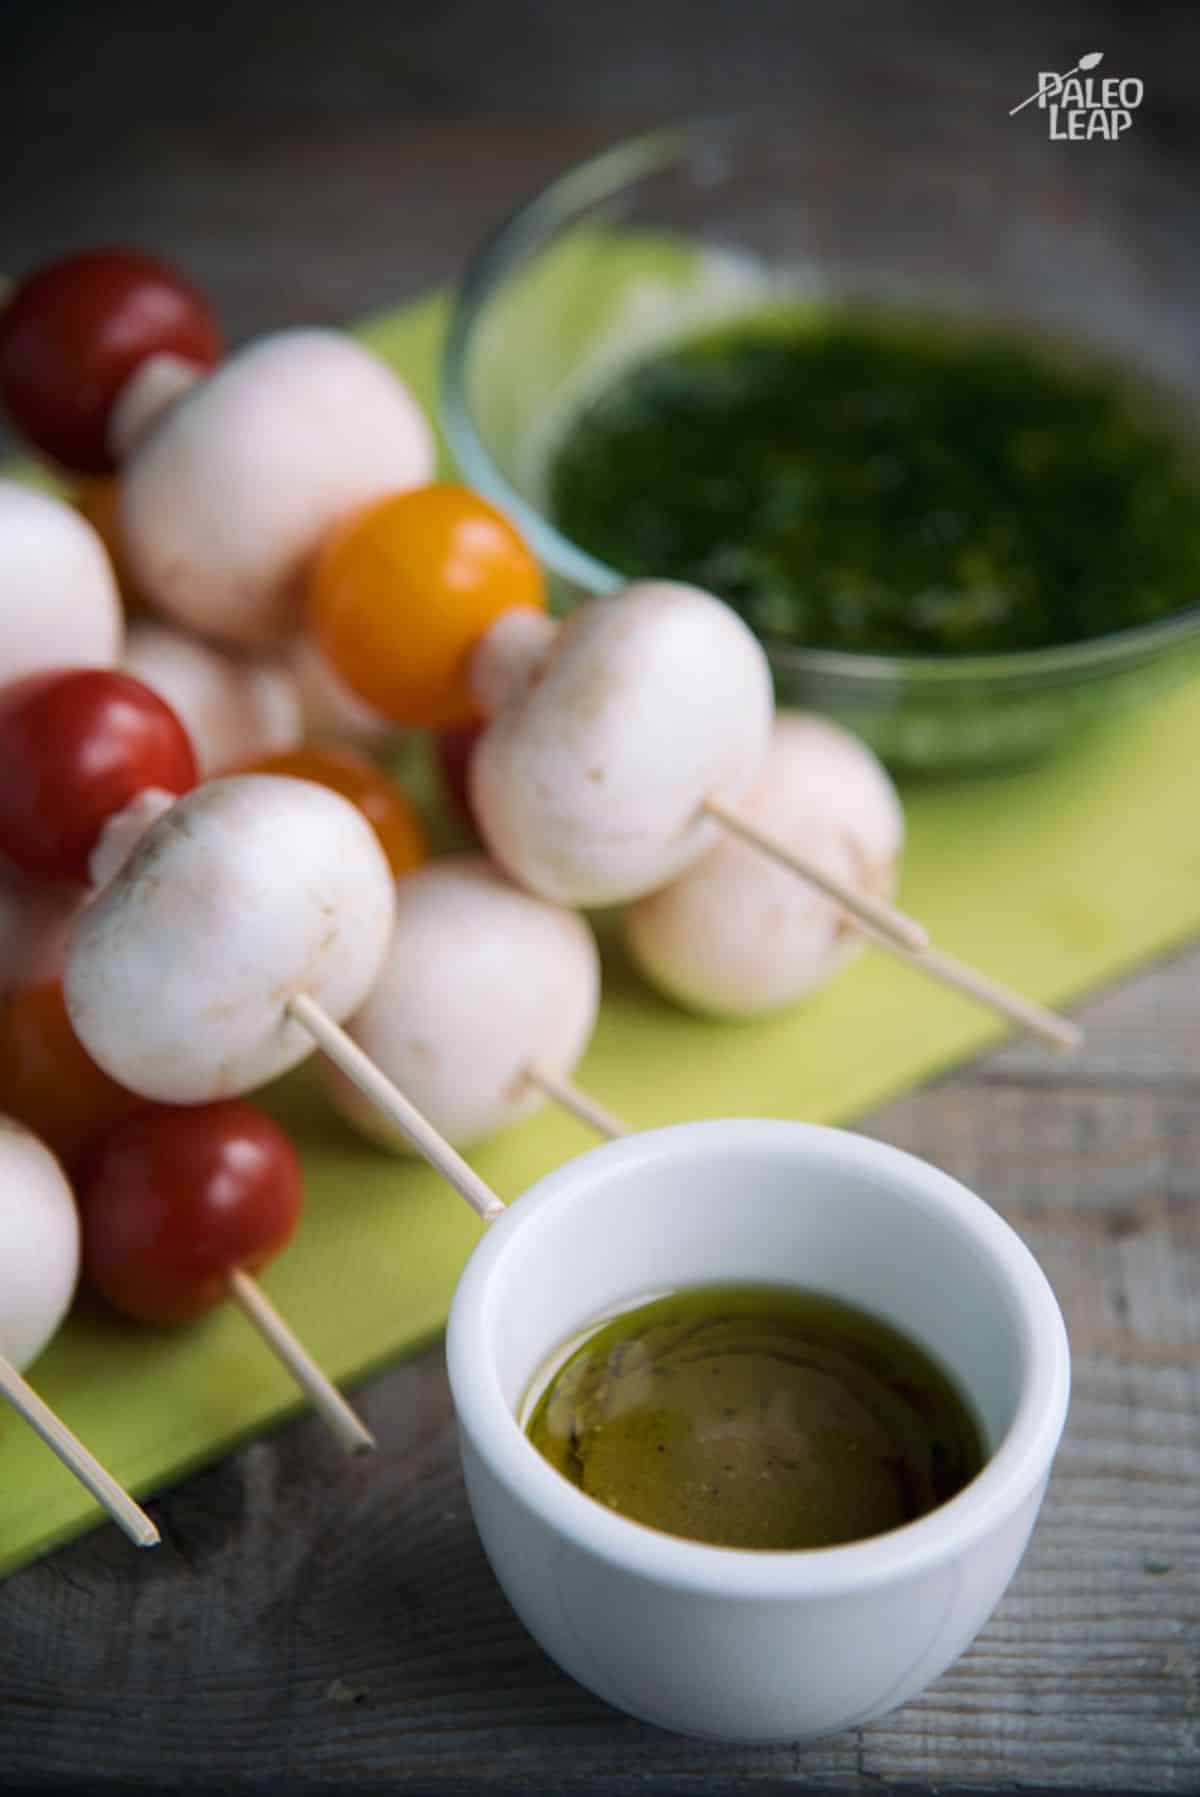 Tomato and Mushroom Skewers With Herb Sauce Recipe Preparation